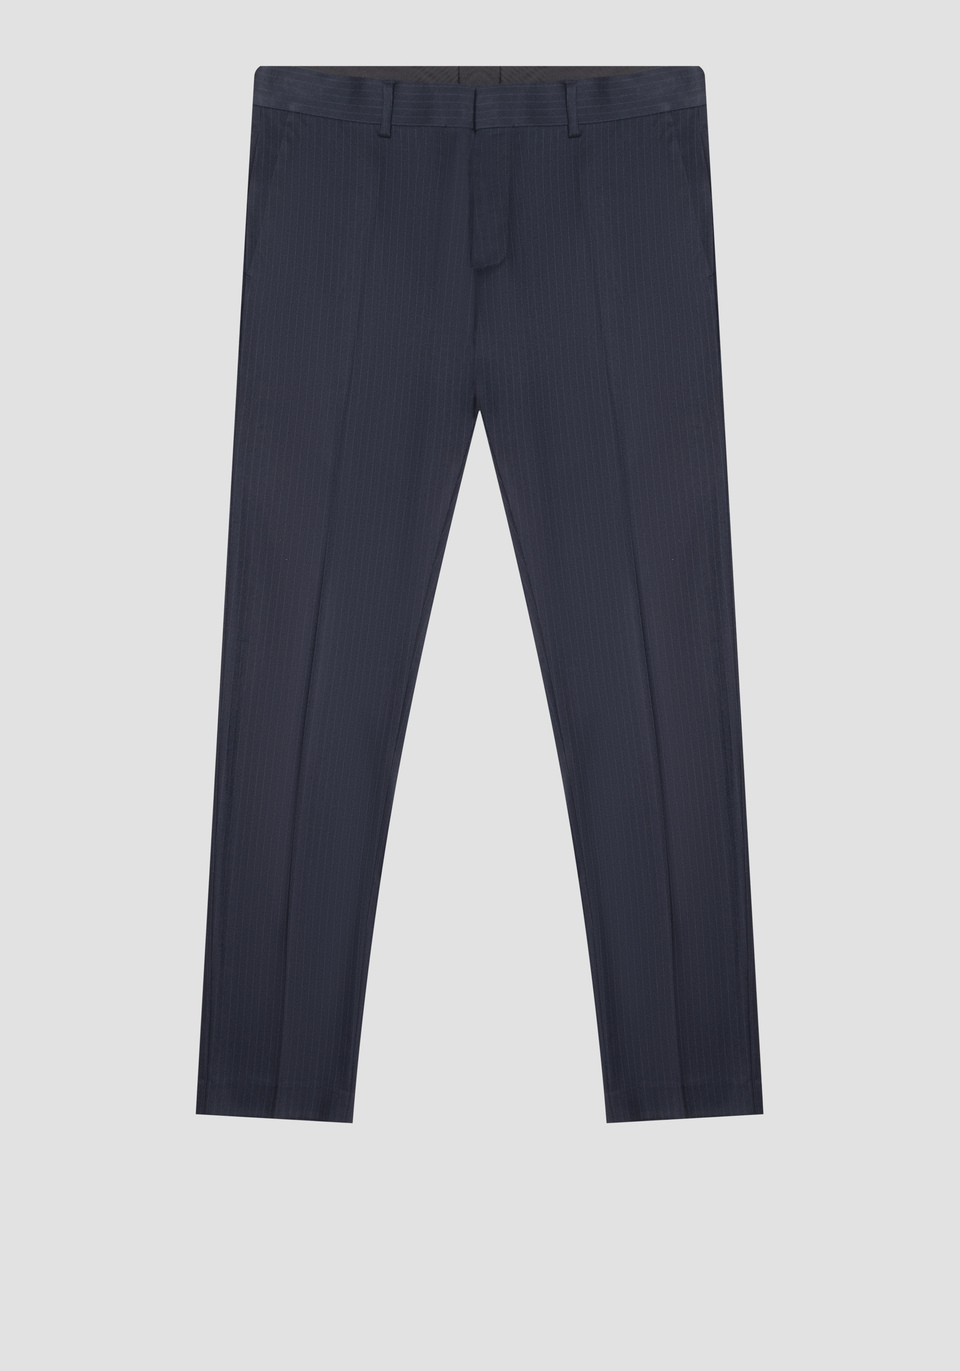 “BONNIE” SLIM-FIT TROUSERS IN VISCOSE-BLEND FABRIC WITH PINSTRIPE MOTIF - Antony Morato Online Shop